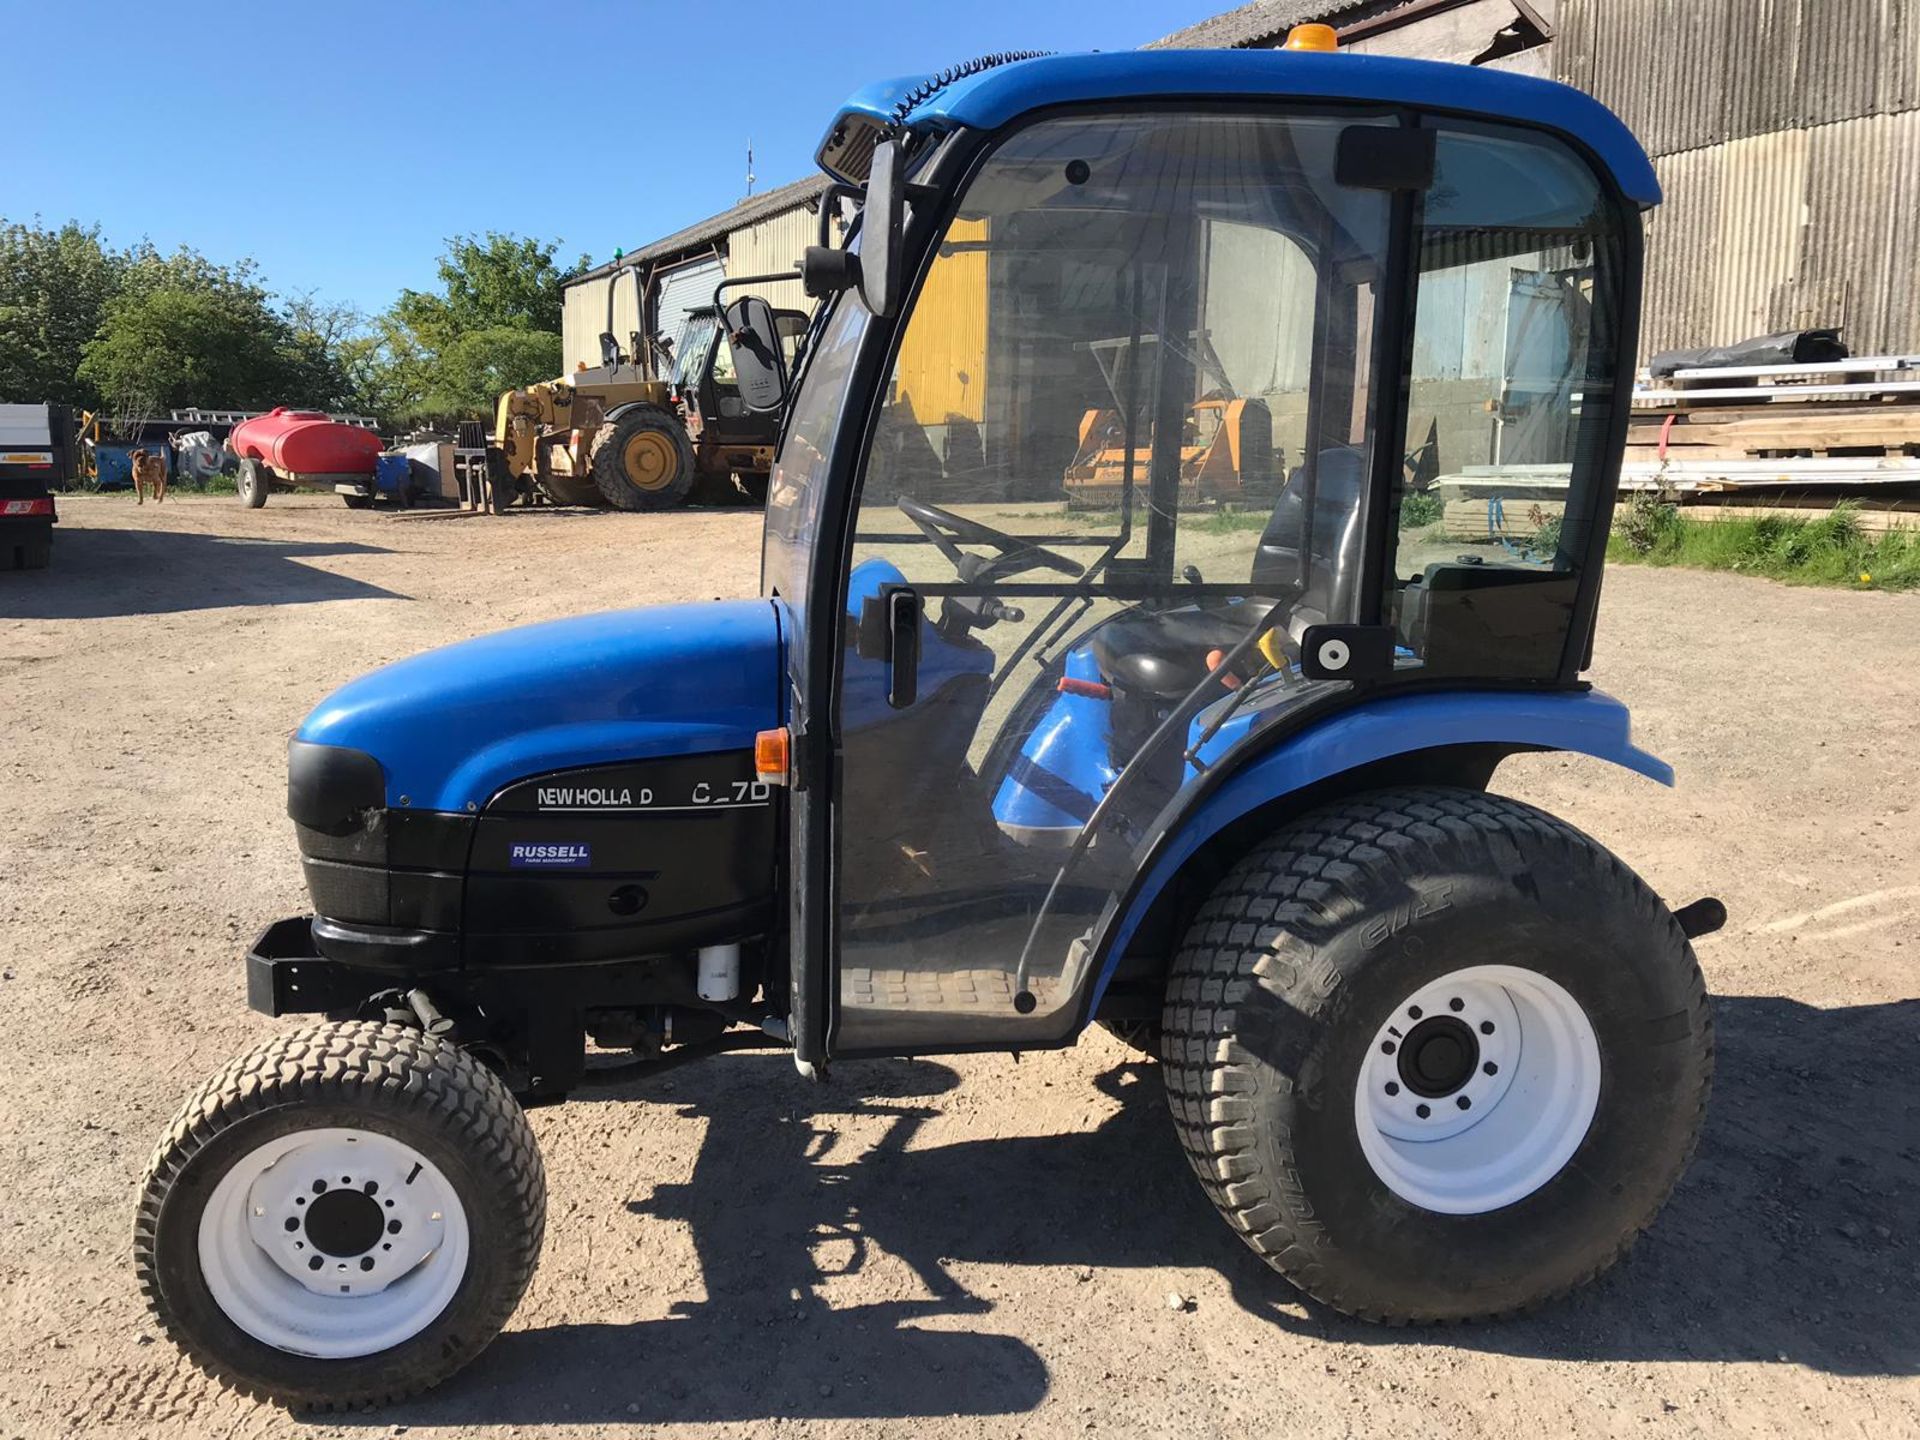 2004 NEW HOLLAND TRACTOR C27D - Image 2 of 11